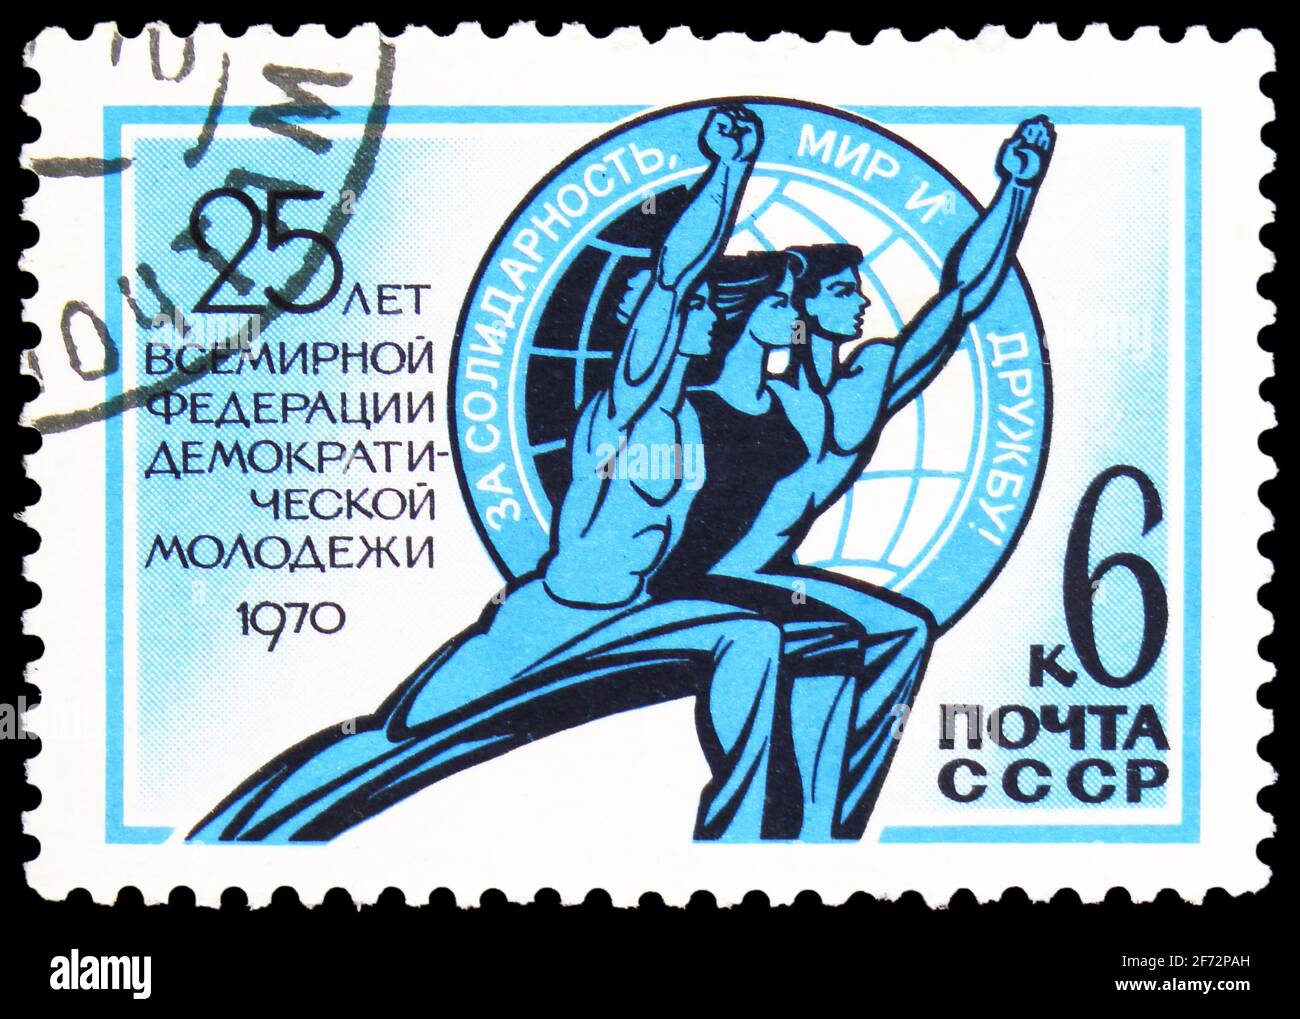 MOSCOW, RUSSIA - JANUARY 12, 2021: Postage stamp printed in USSR (Russia) shows Young Workers and Emblem, 25th Anniversary of World Federation of Demo Stock Photo